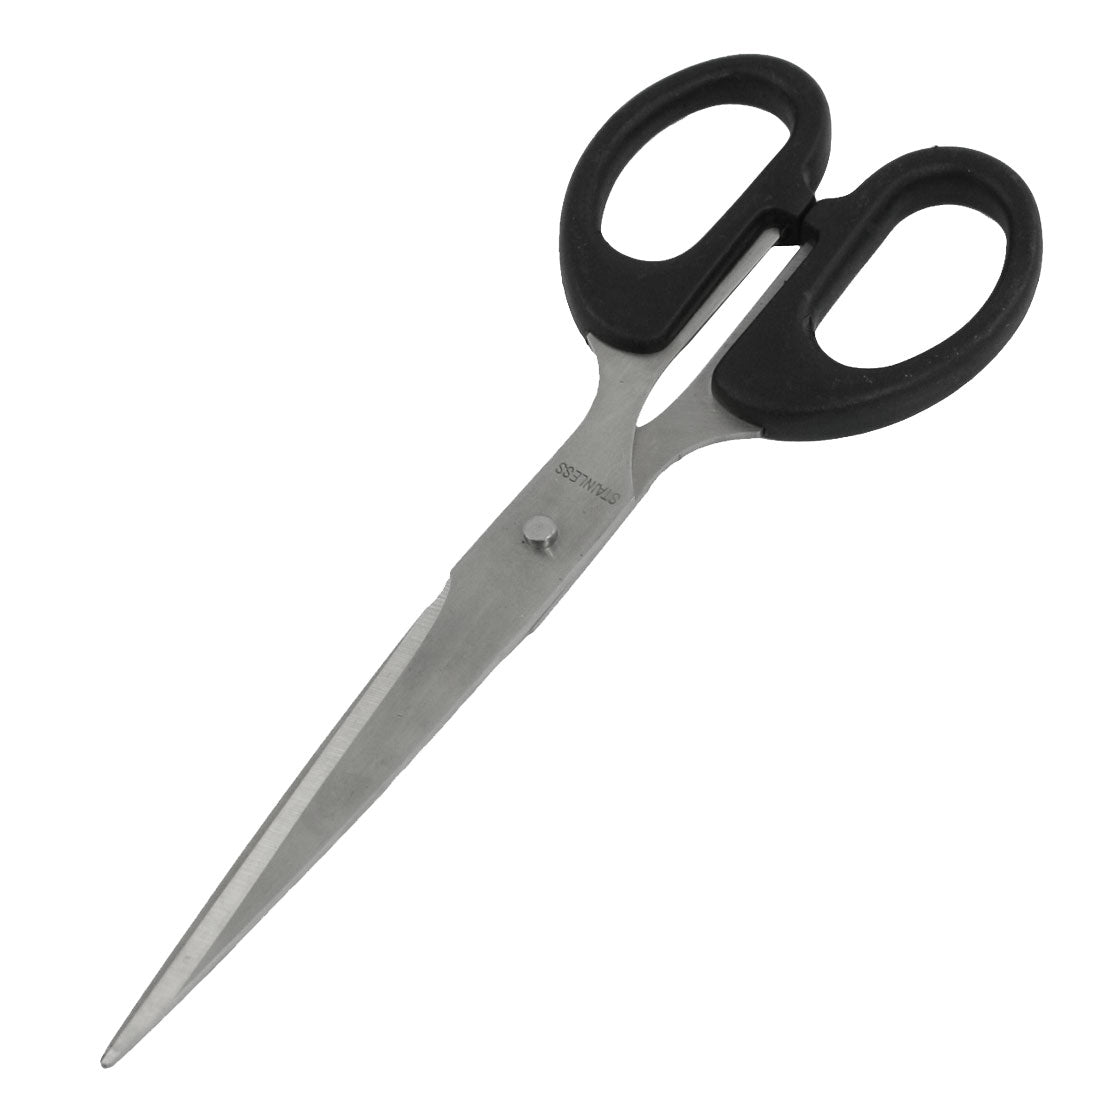 uxcell Uxcell Tailor Hand Tool Black Plastic Handle 5.5" Long Scissors